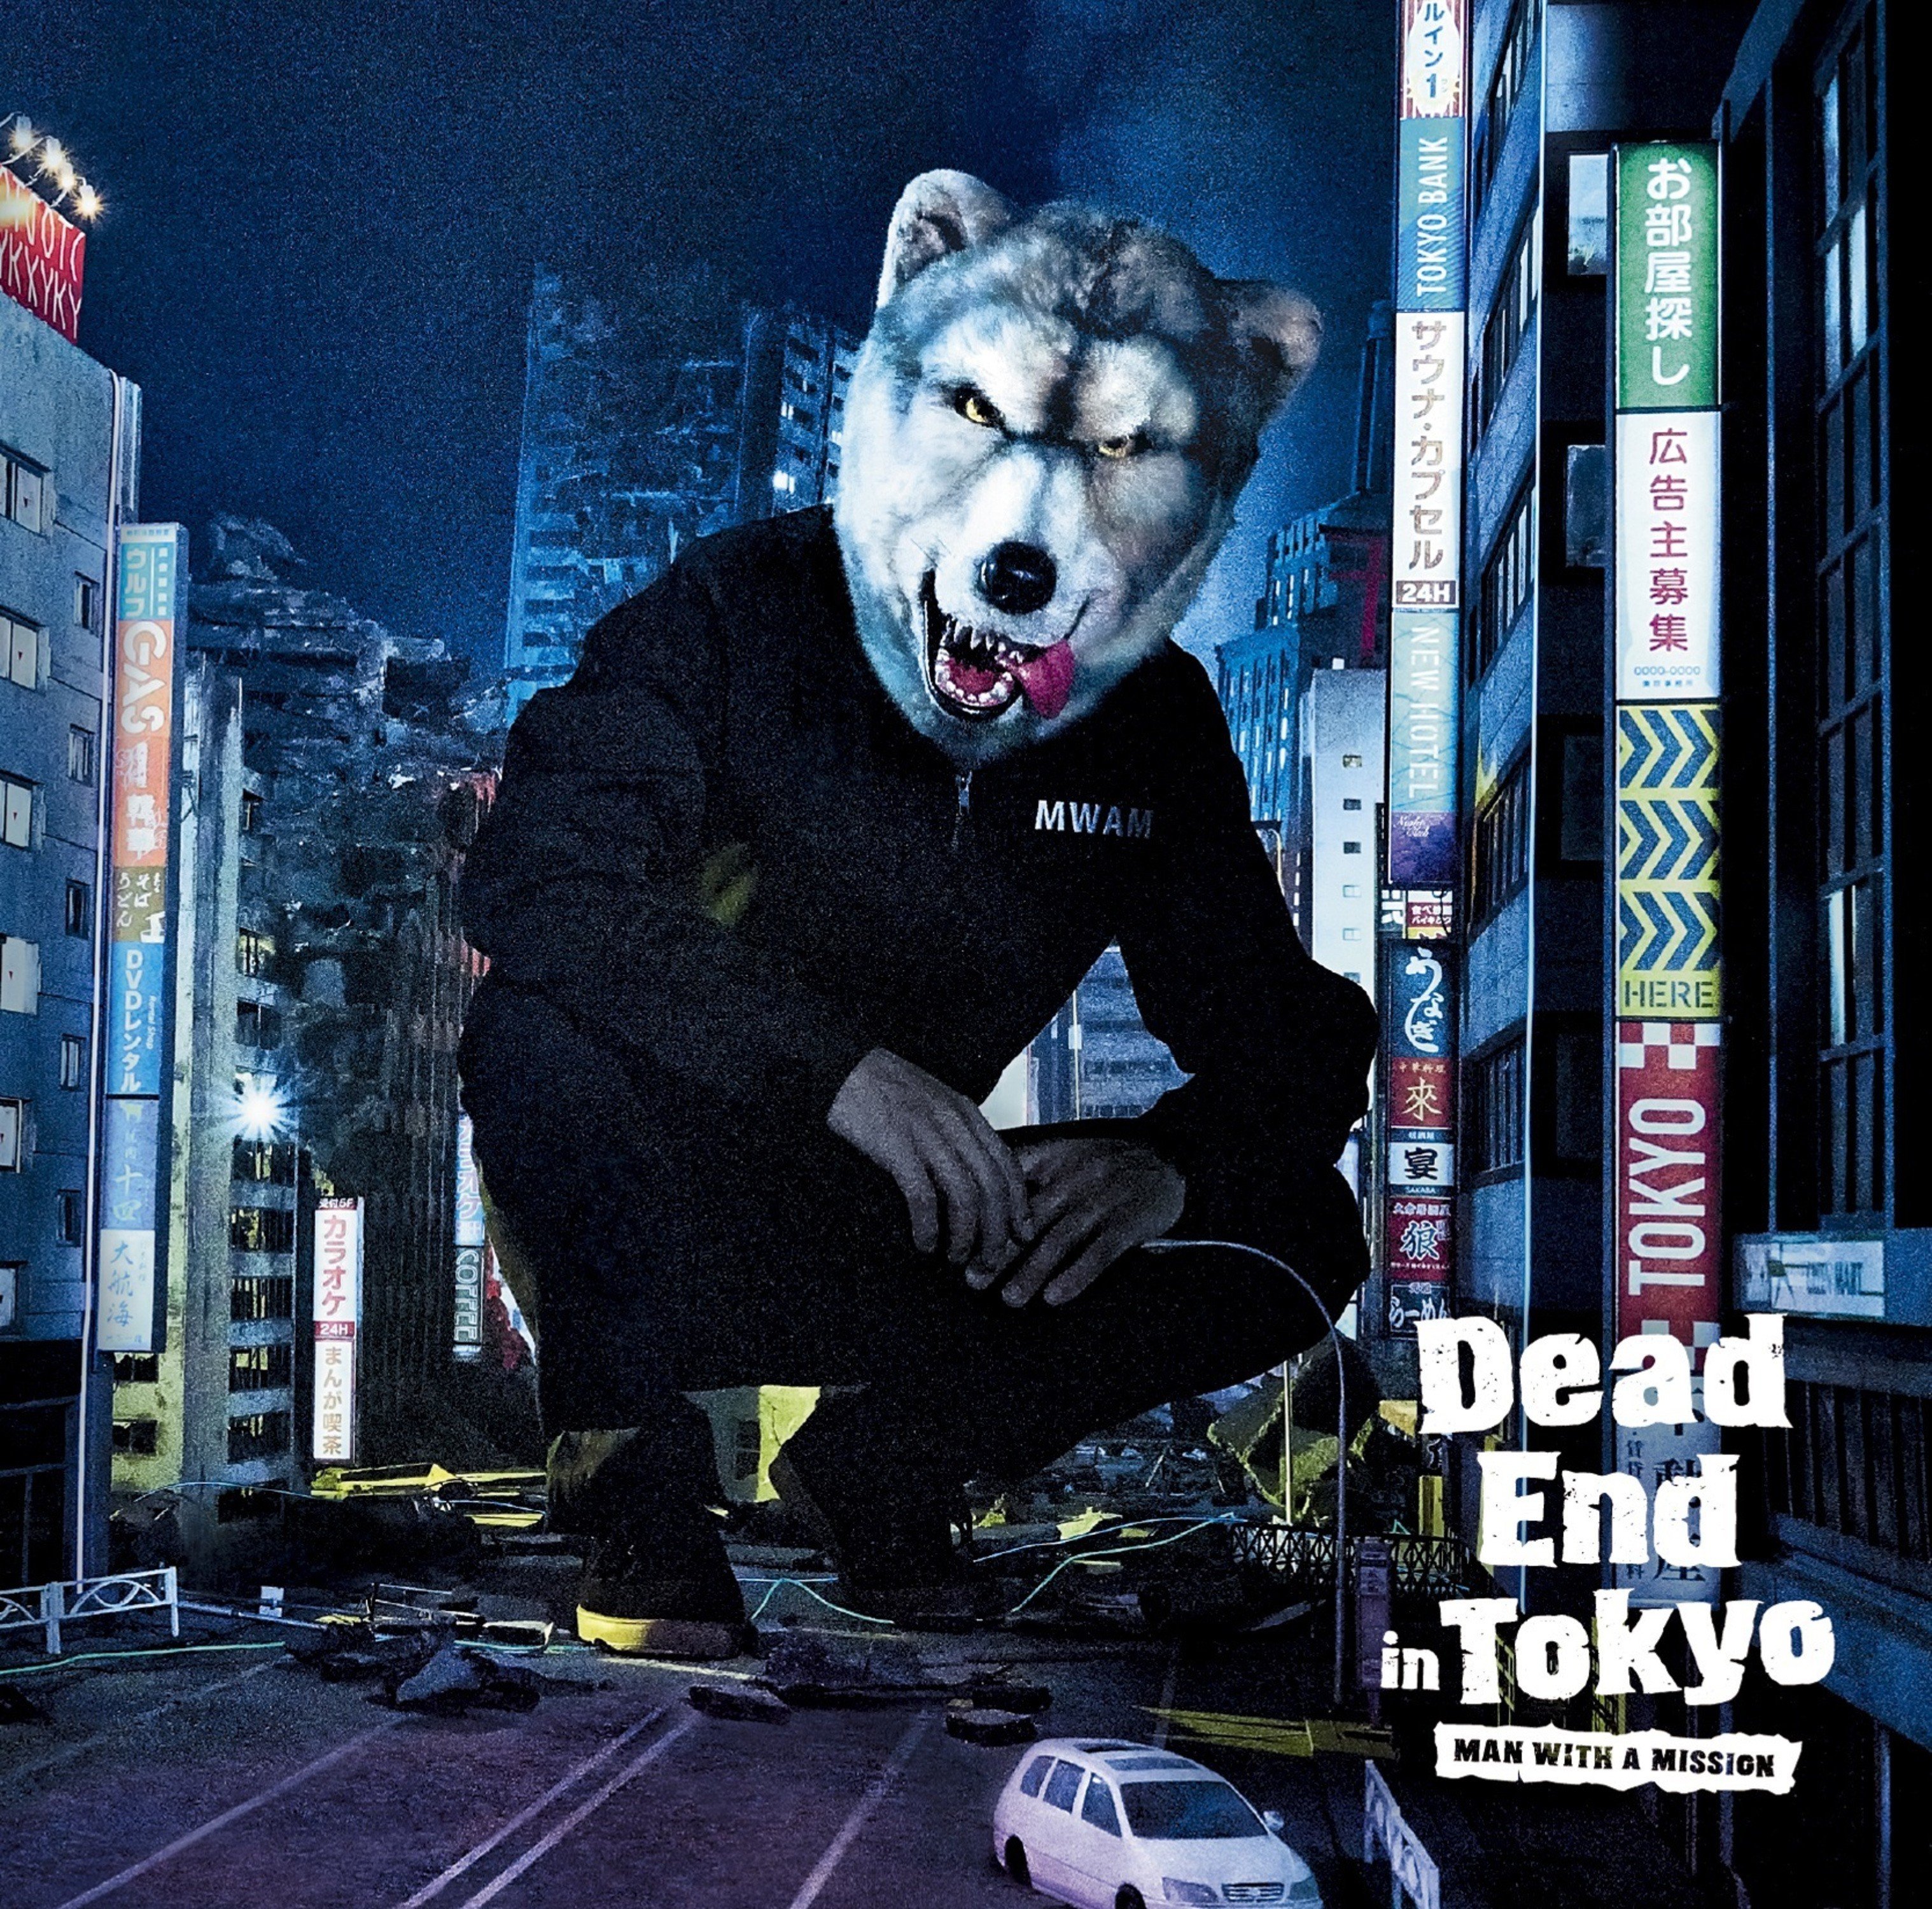 MAN WITH A MISSION – Dead End in Tokyo [Mora FLAC 24bit/44,1kHz]